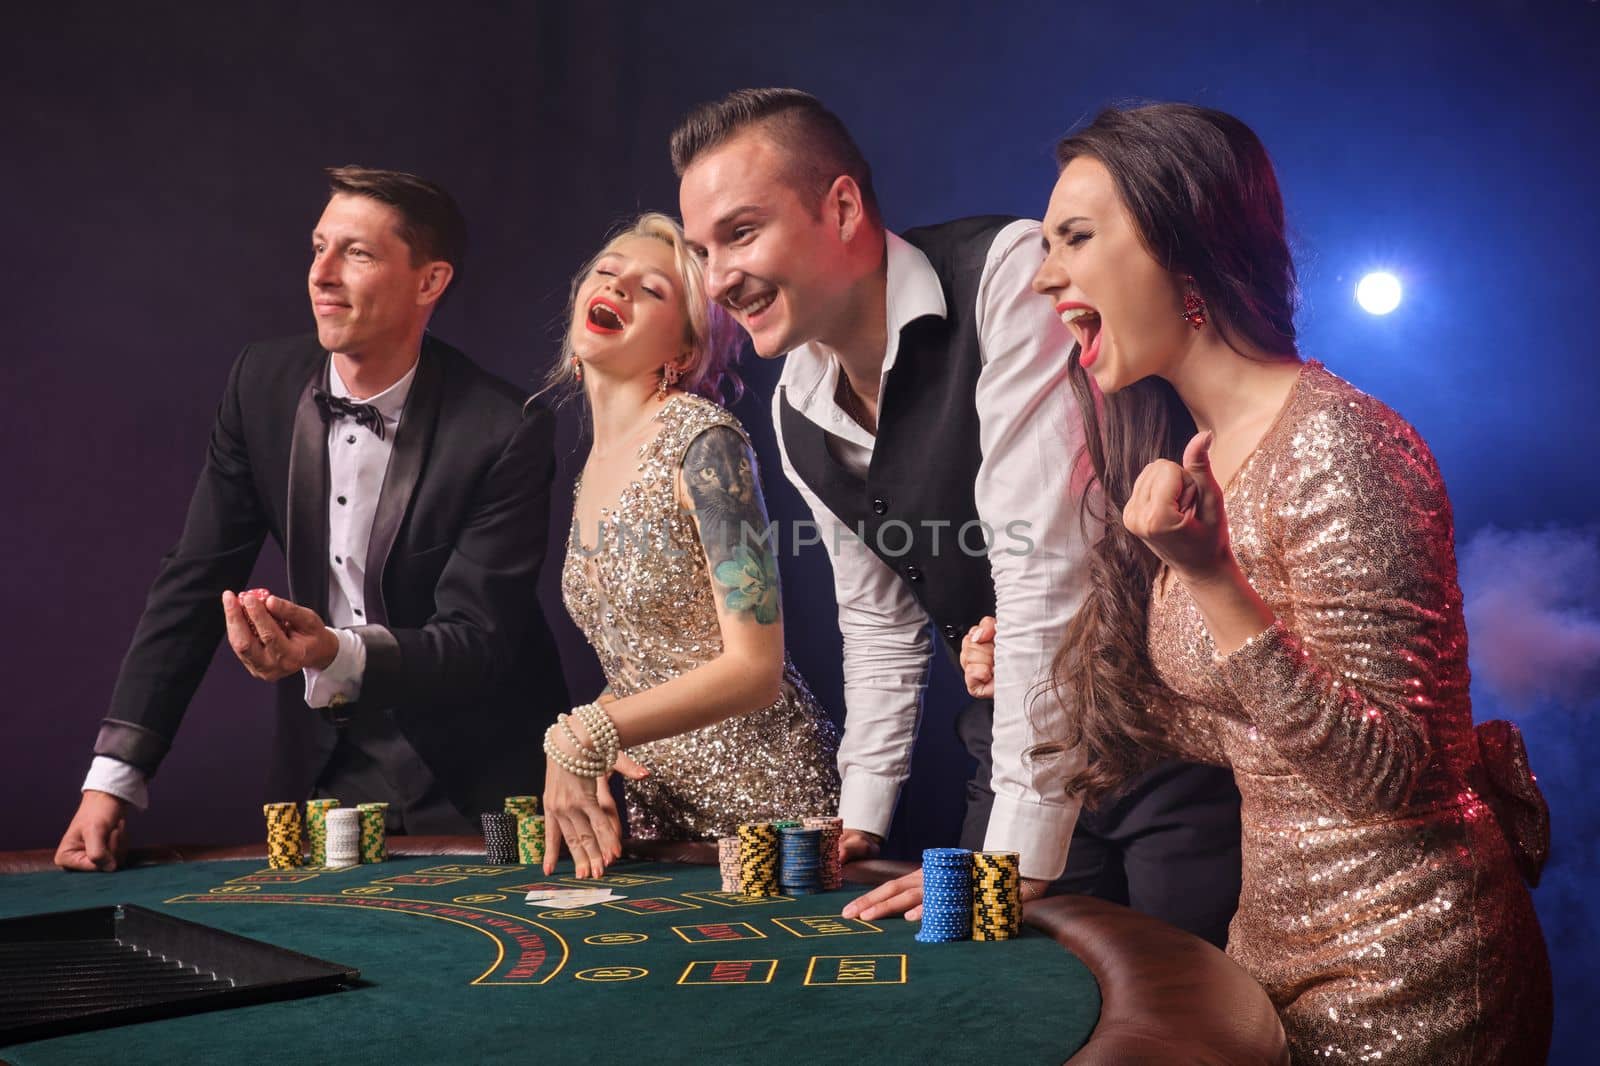 Side shot of a joyful rich companions playing poker at casino in smoke. Youth are making bets waiting for a big win. They are looking excited standing at the table against a red and blue backlights on black background. Risky gambling entertainment.